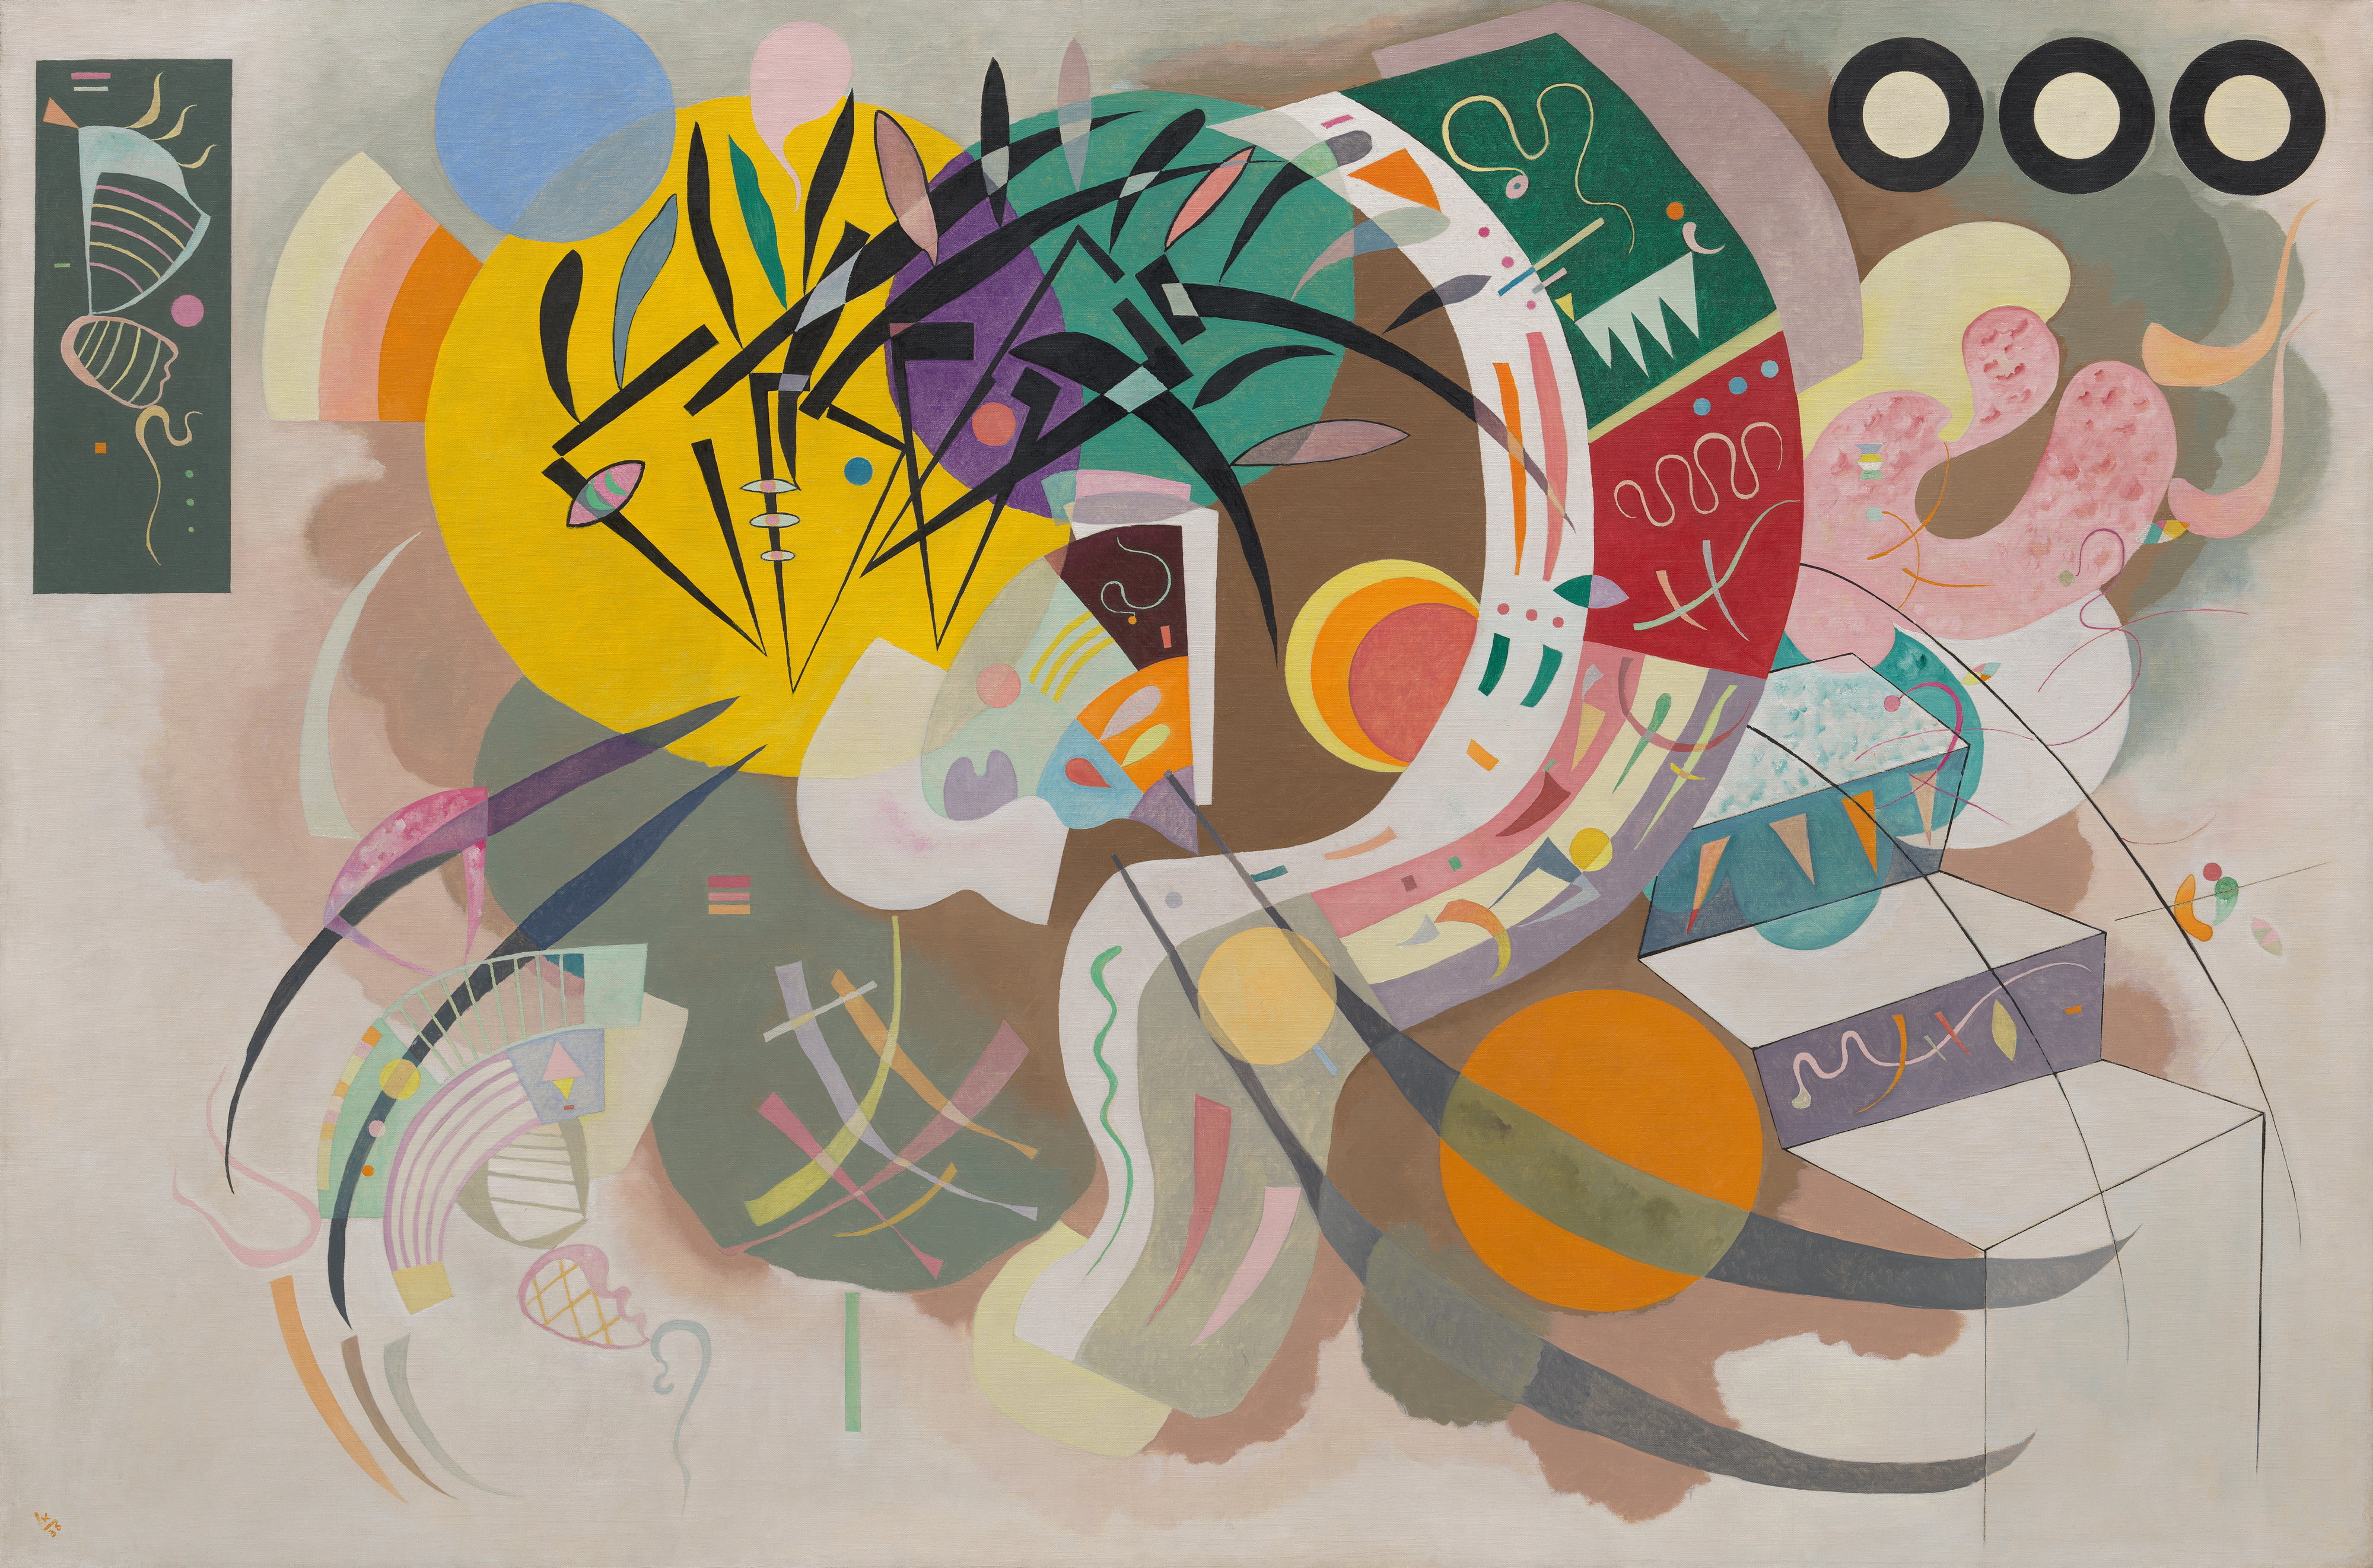 Kandinsky's Dominant Curve painting, featuring a tangle of abstract colourful shapes.